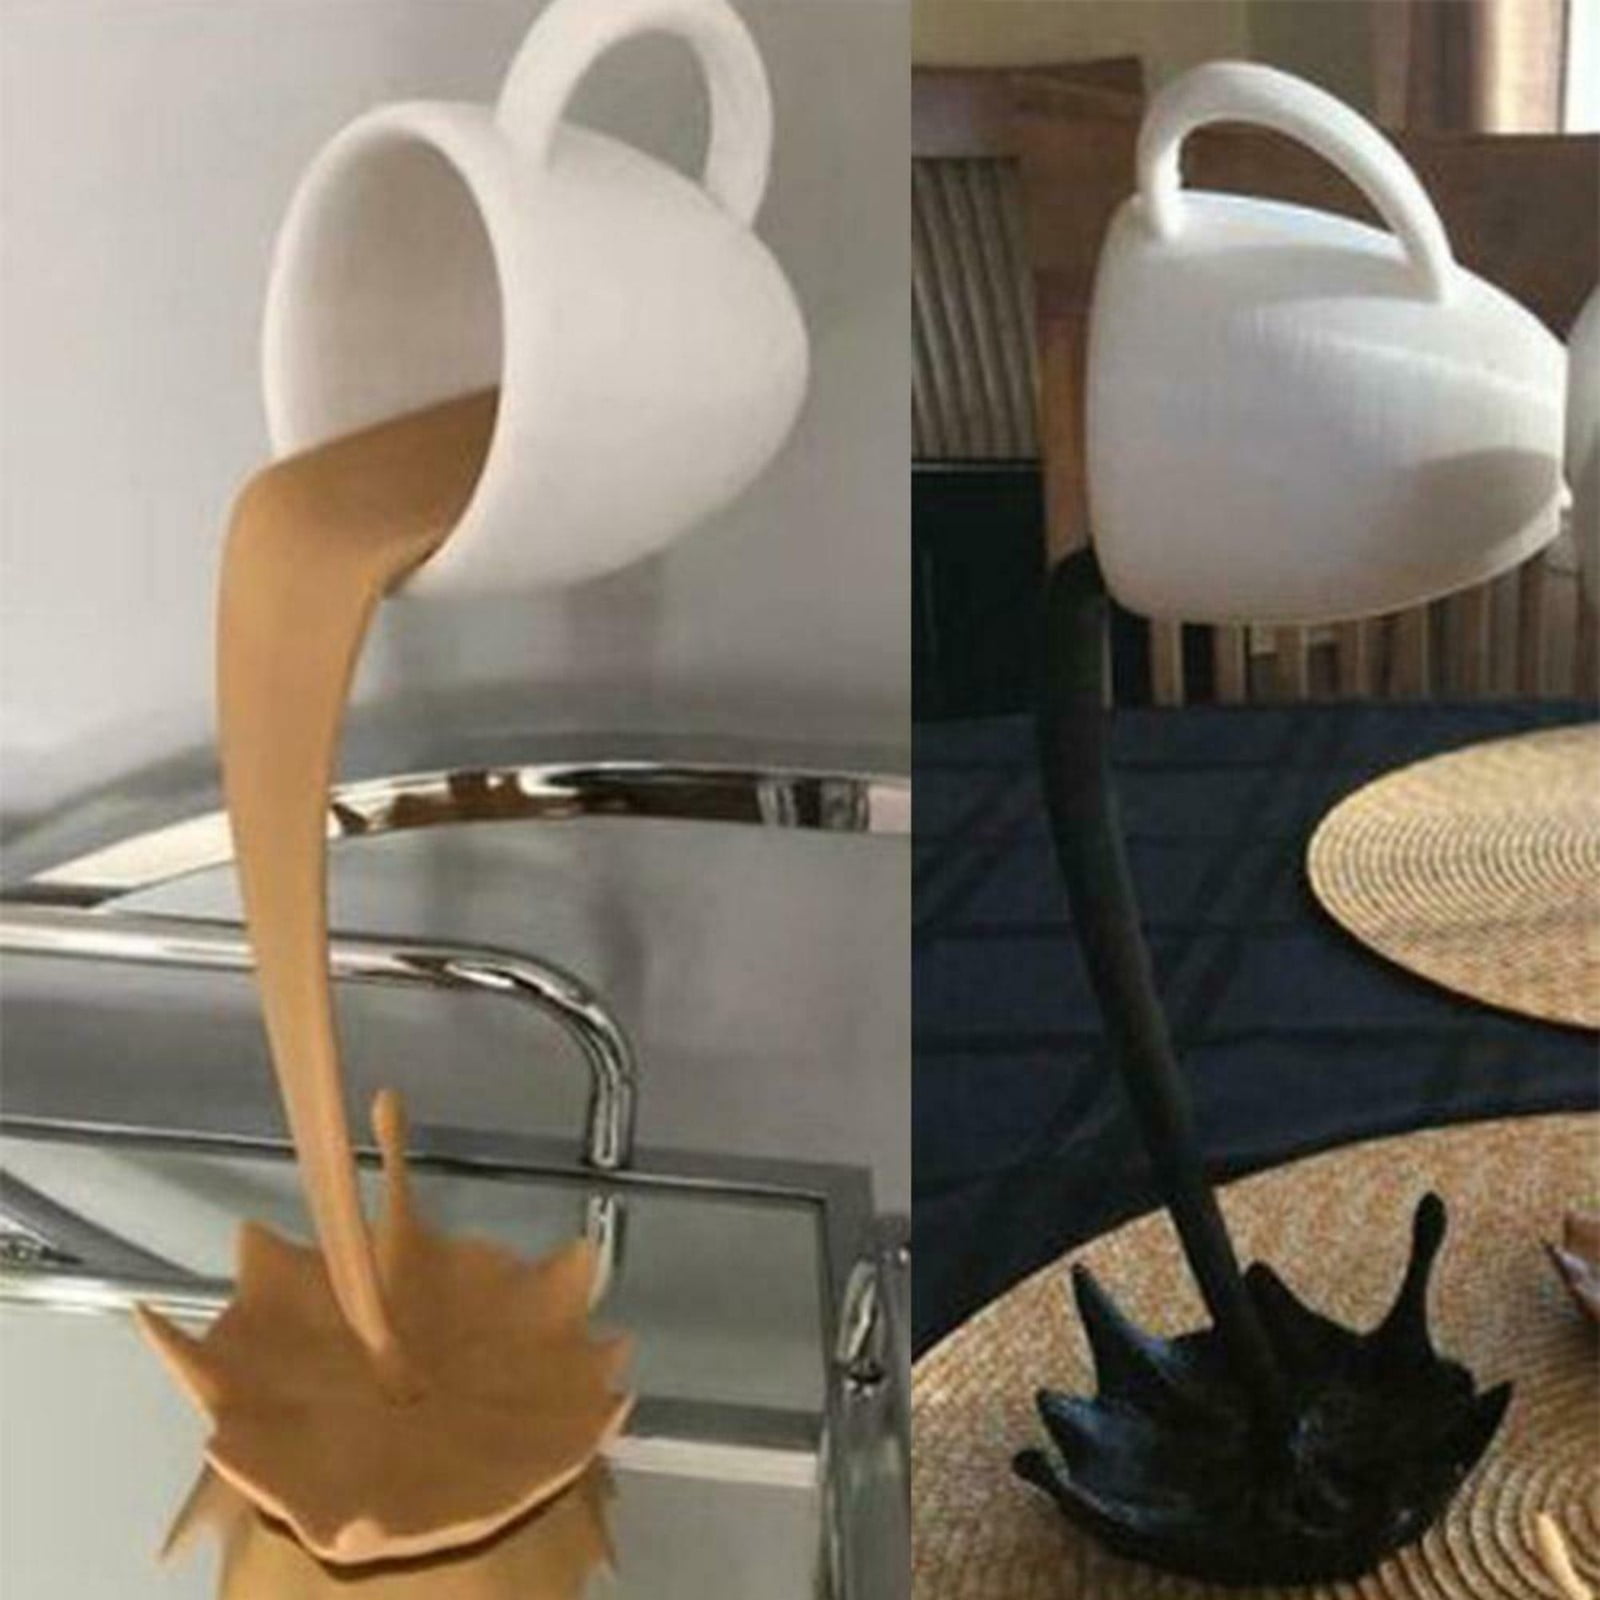 Floating Coffee Cup 2 Pieces Spilling Large Coffee Cups Floating Coffee Cup  Mug Sculpture Floating C…See more Floating Coffee Cup 2 Pieces Spilling